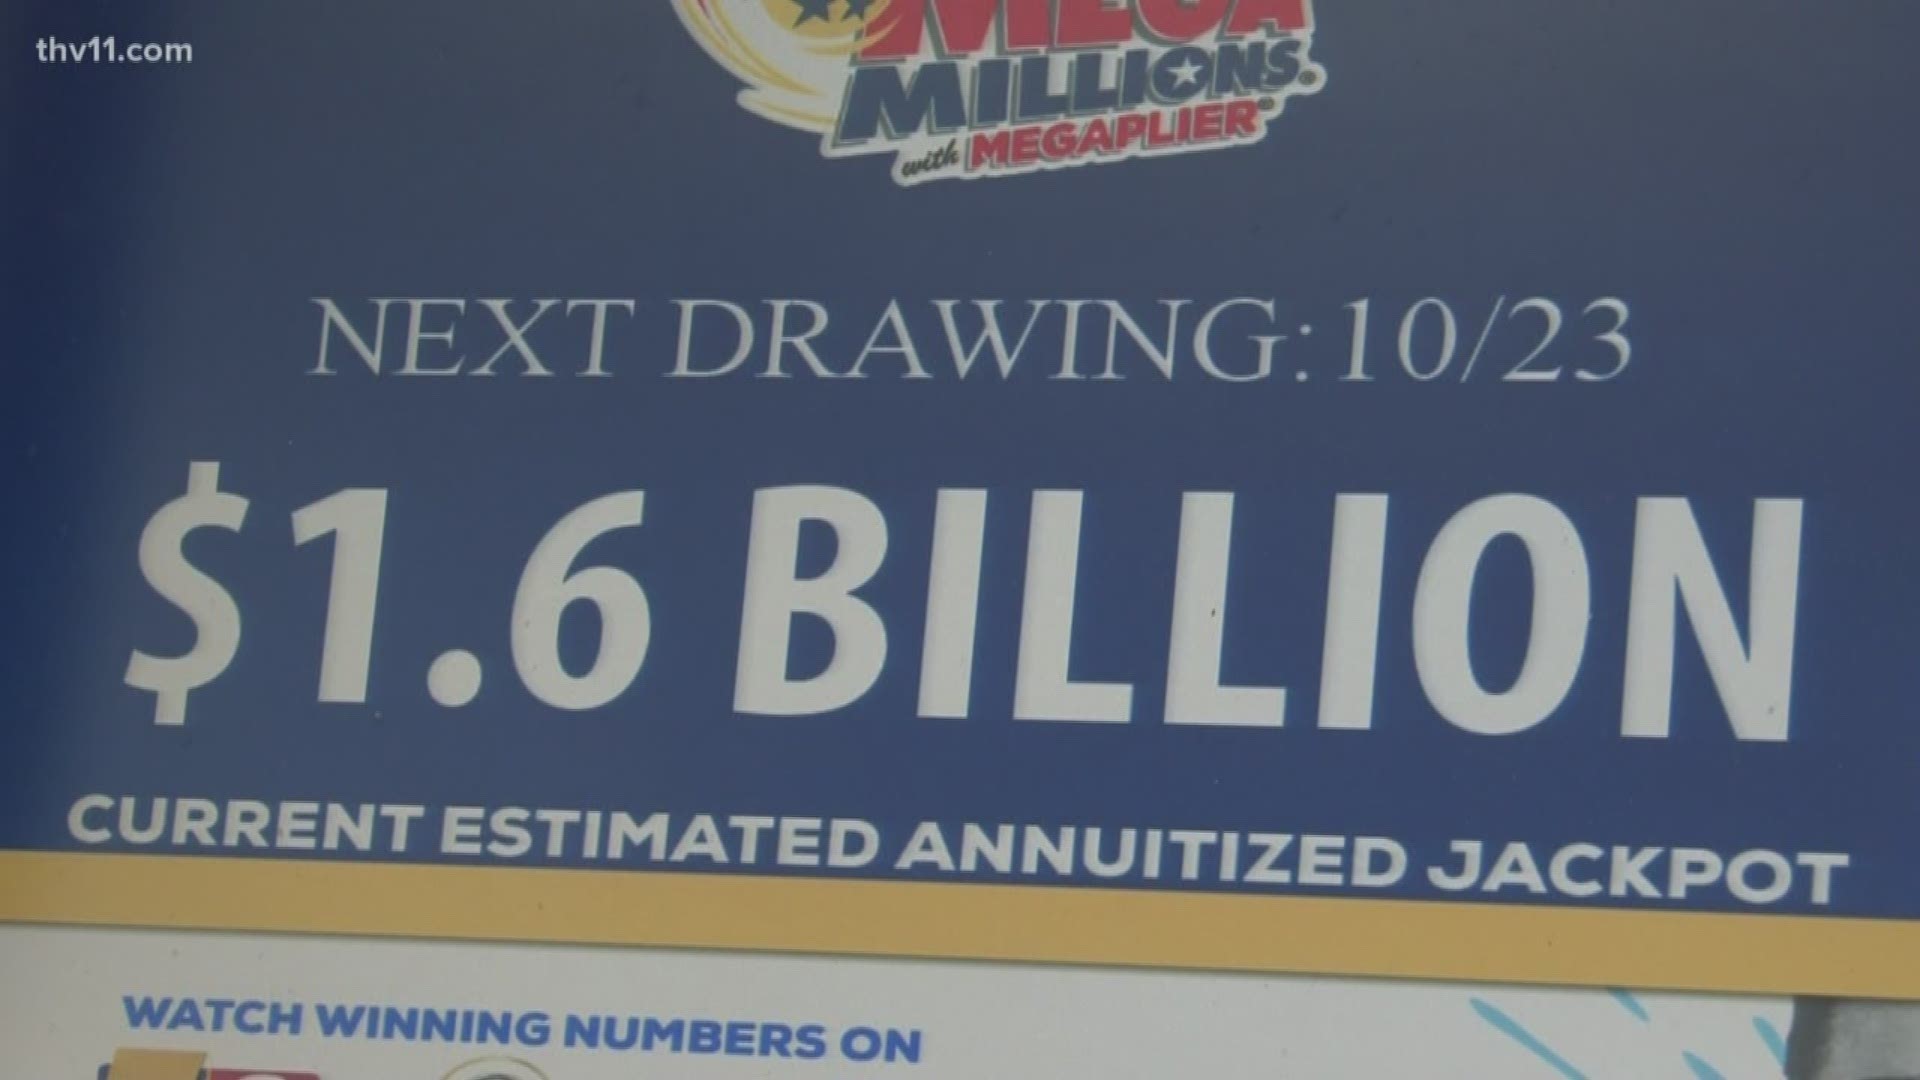 The Mega Millions Jackpot is currently sitting at $1.6 billion.